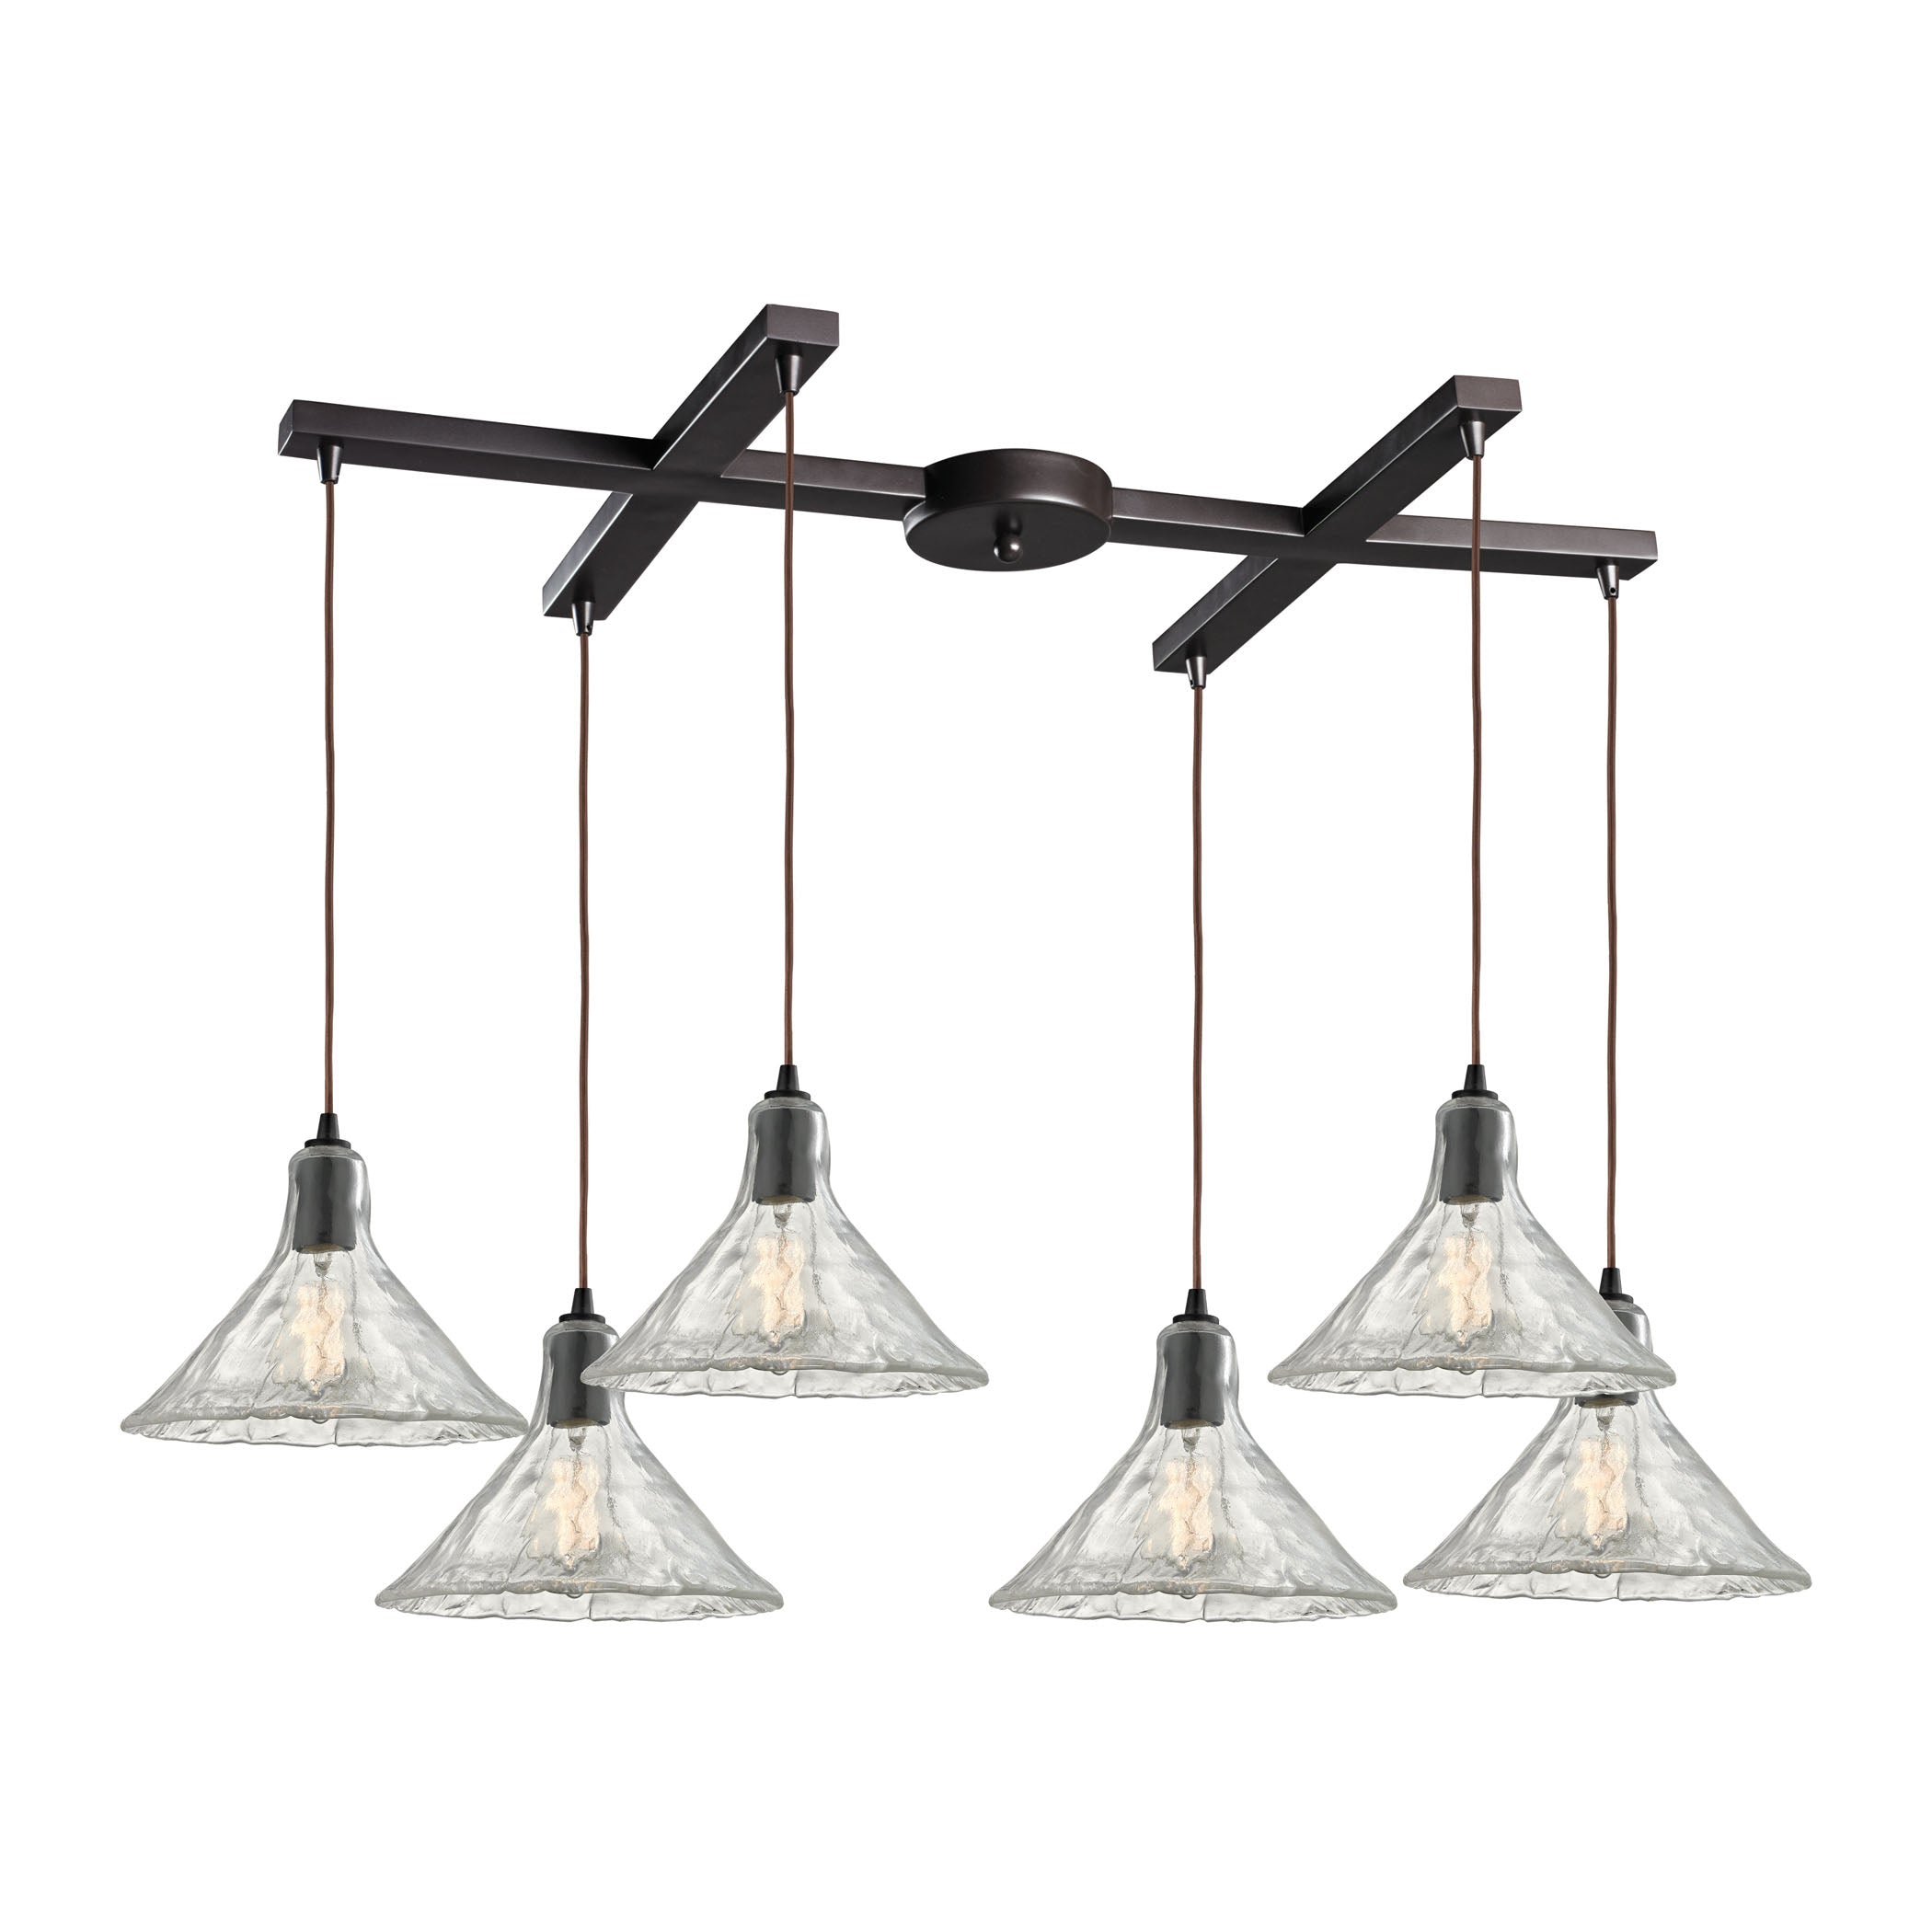 ELK Lighting 10435/6 Hand Formed Glass 6-Light H-Bar Pendant Fixture in Oiled Bronze with Clear Hand-formed Glass